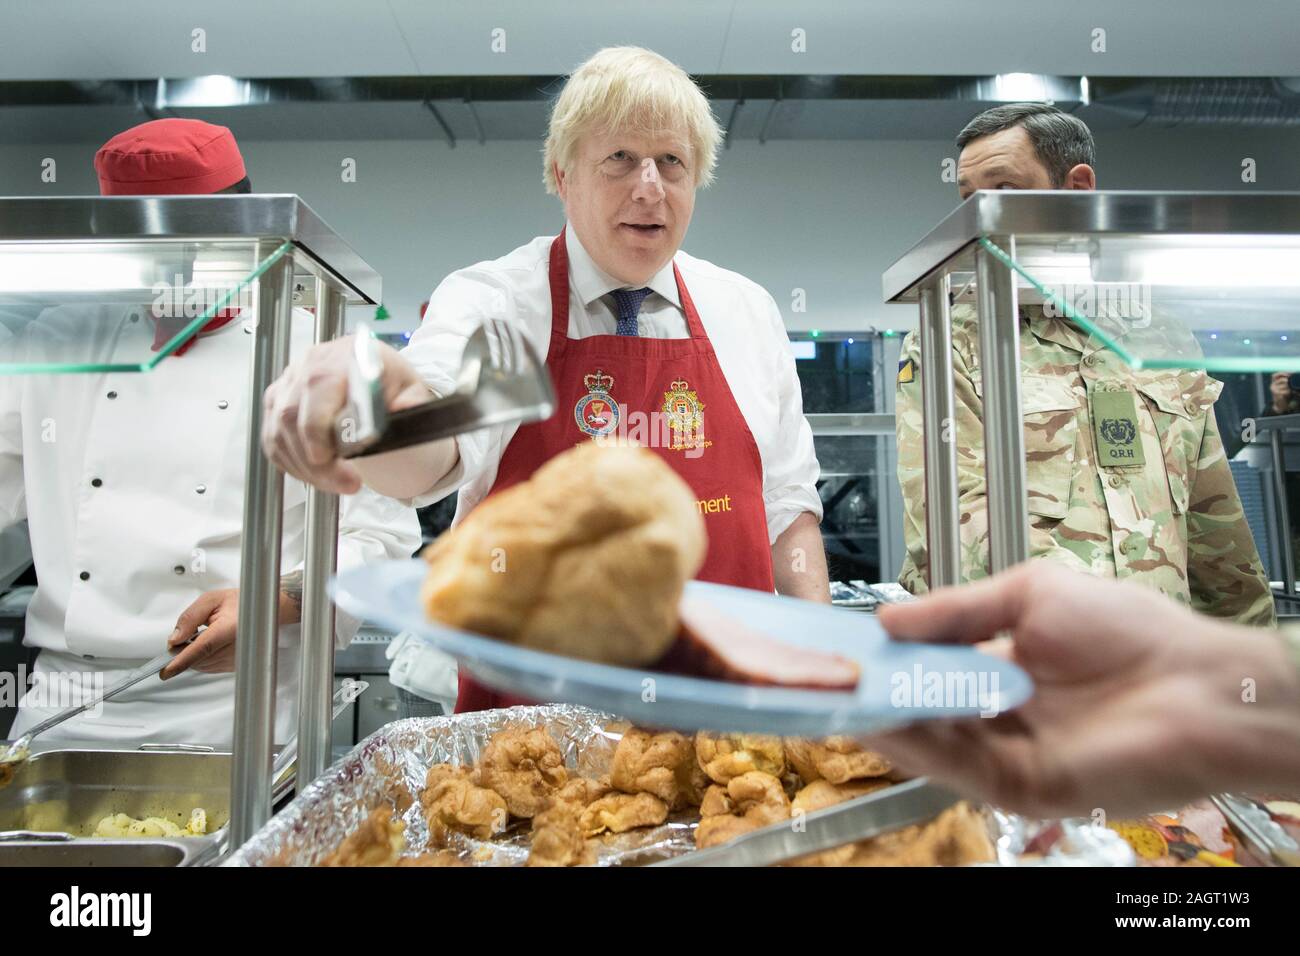 Prime Minister Boris Johnson serves Christmas lunch to British troops stationed in Estonia during a one-day visit to the Baltic country. PA Photo. Picture date: Saturday December 21, 2019. The Prime Minister thanked the servicemen and women for their work as he joined them for lunch at the Tapa military base near the capital Tallinn. The base is home to 850 British troops from the Queen's Royal Hussars who lead the Nato battlegroup along with personnel from Estonia, France and Denmark. See PA story POLITICS Estonia. Photo credit should read: Stefan Rousseau/PA Wire Stock Photo